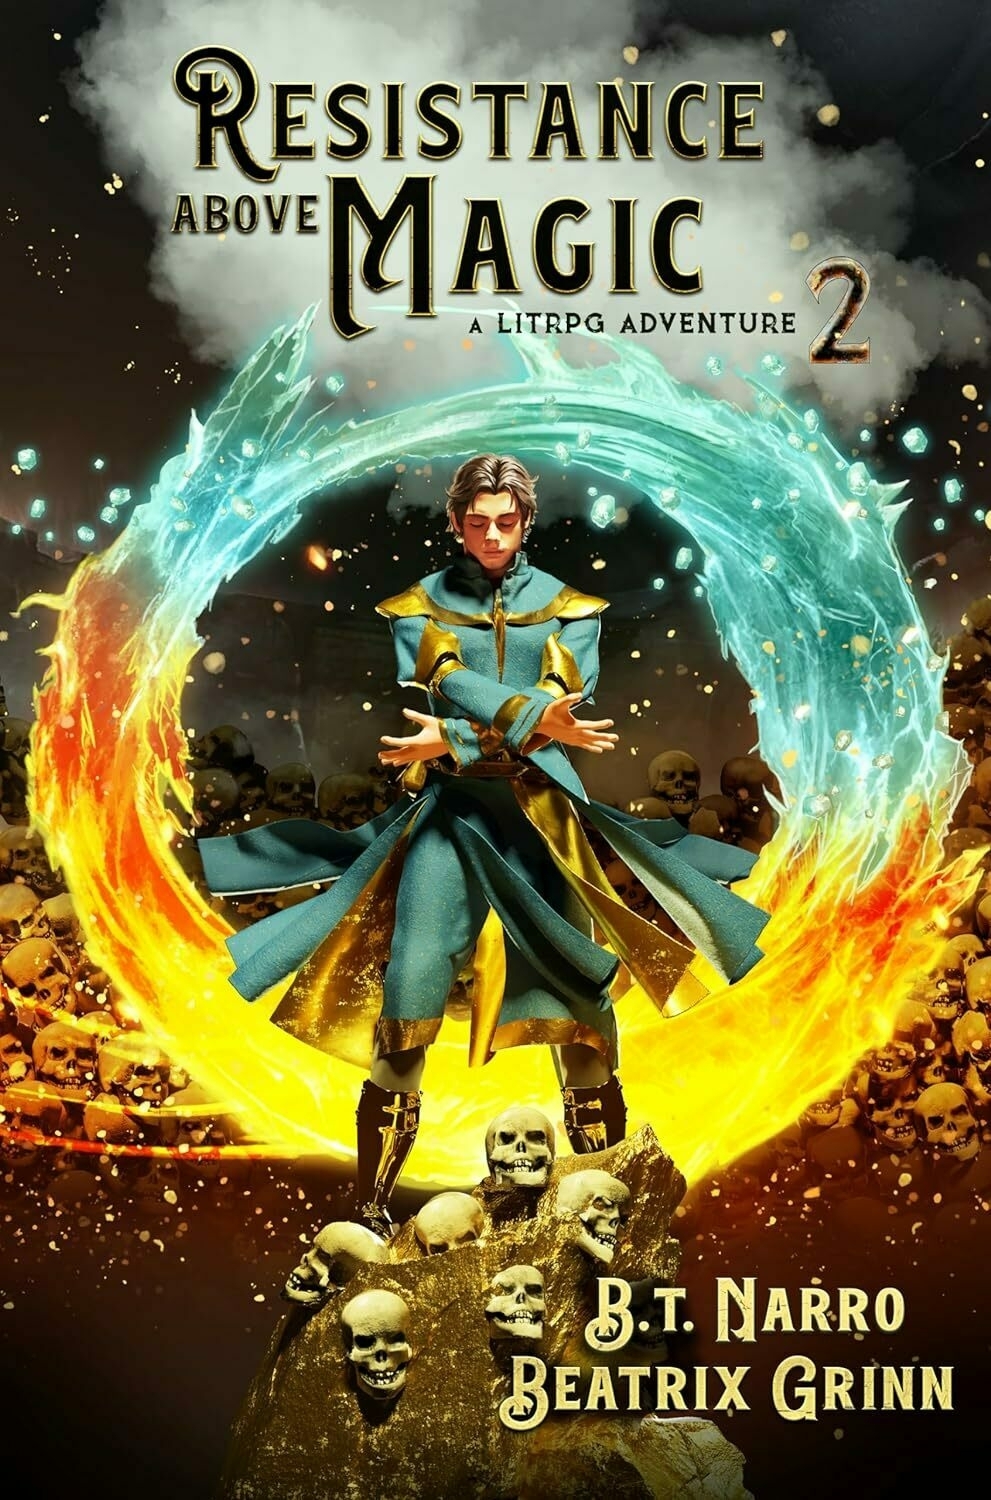 A figure casts a spell, conjuring a fiery torrent and a watery shield amidst a field of skulls. Text: 'RESISTANCE ABOVE MAGIC, A LITRPG ADVENTURE, 2, B.T. NARRO, BEATRIX GRINN'